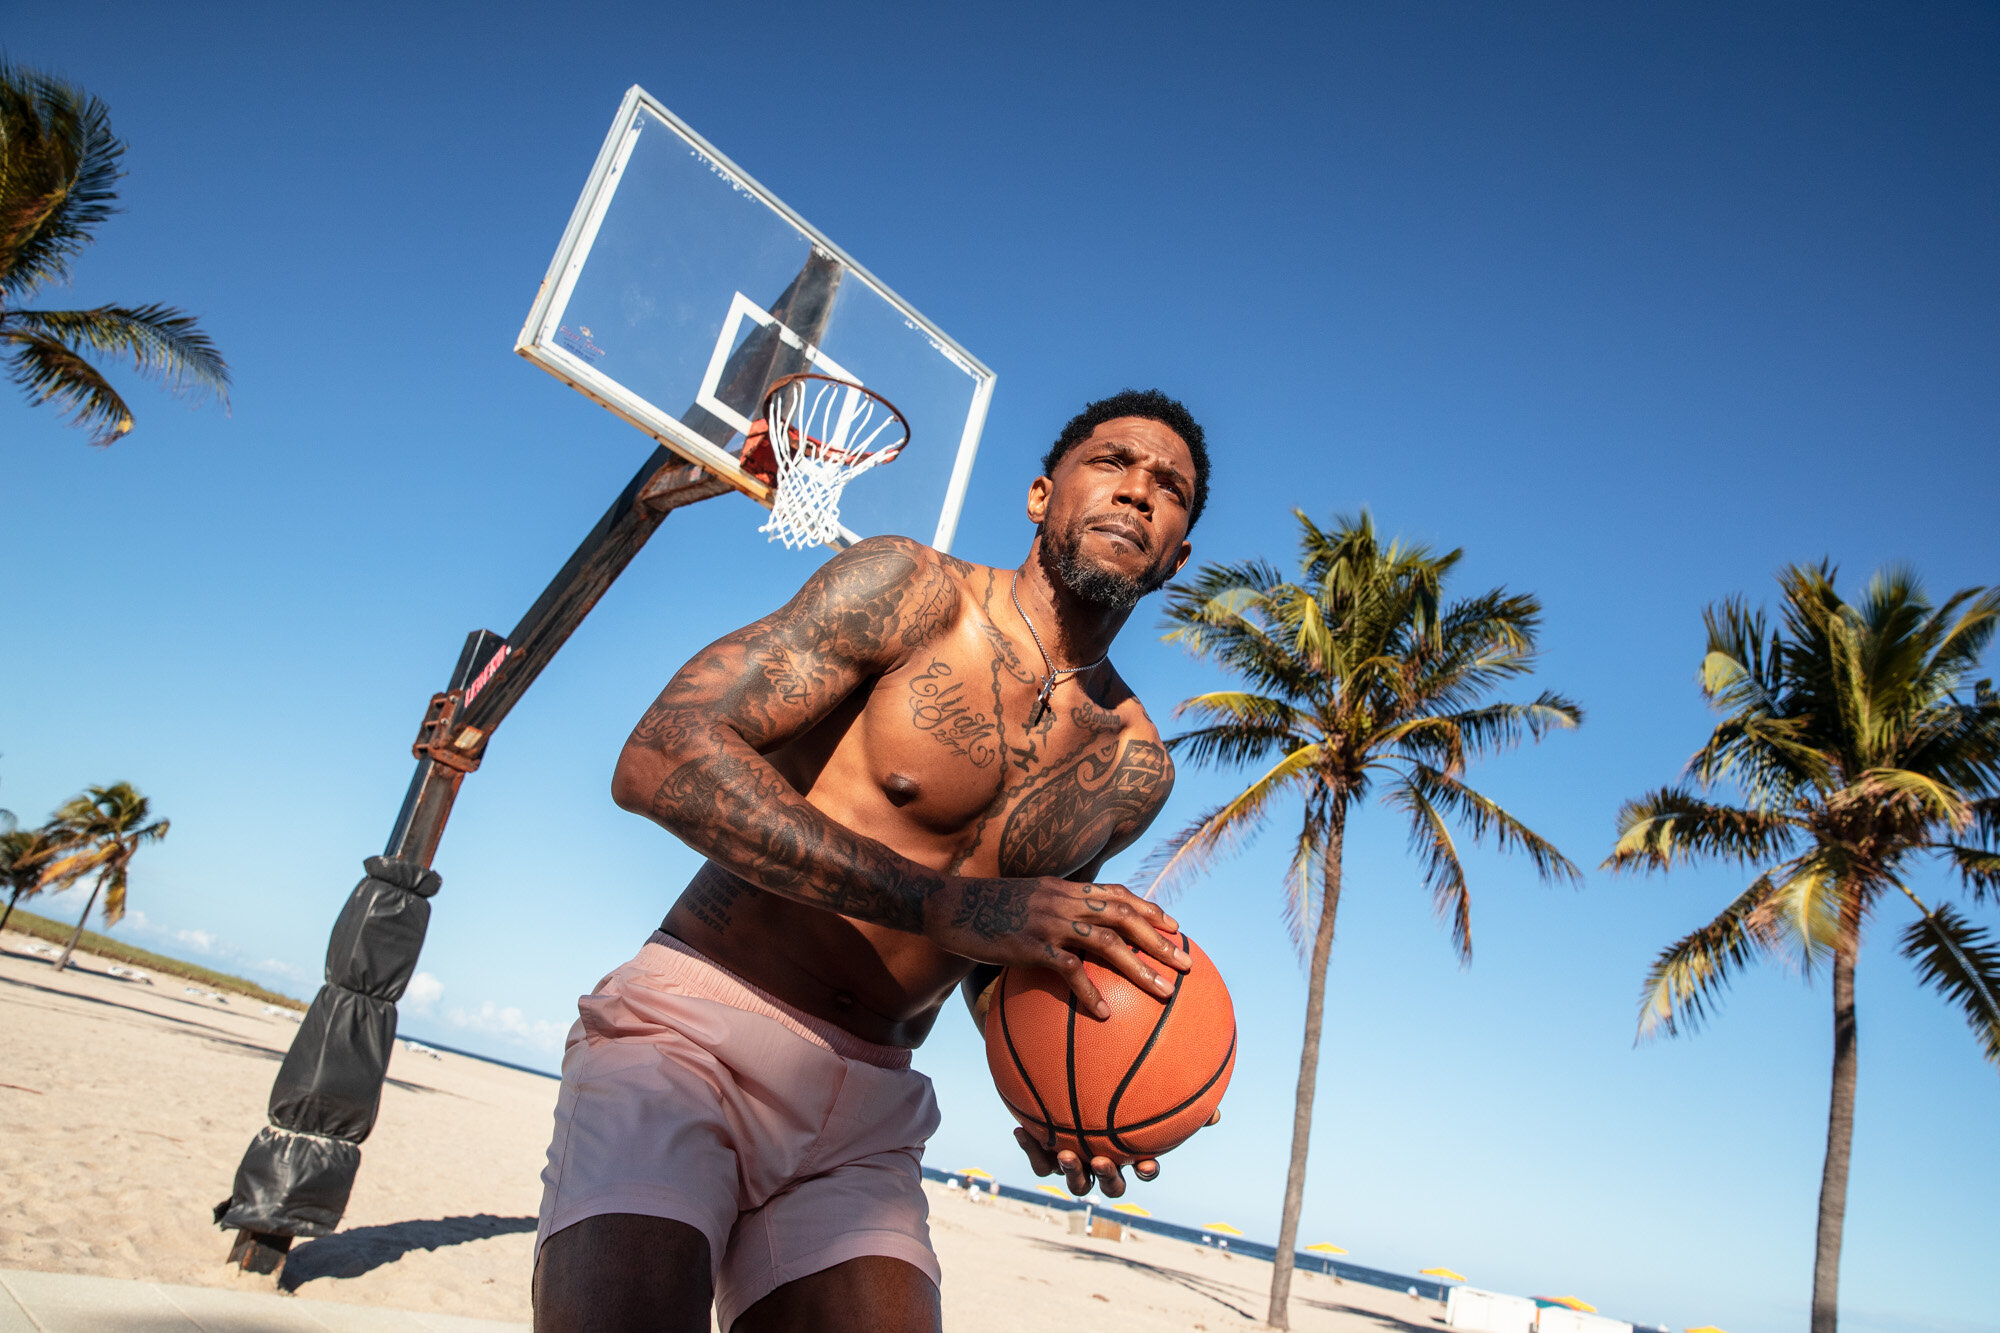 Udonis Haslem on the basketball court in Miami Beach